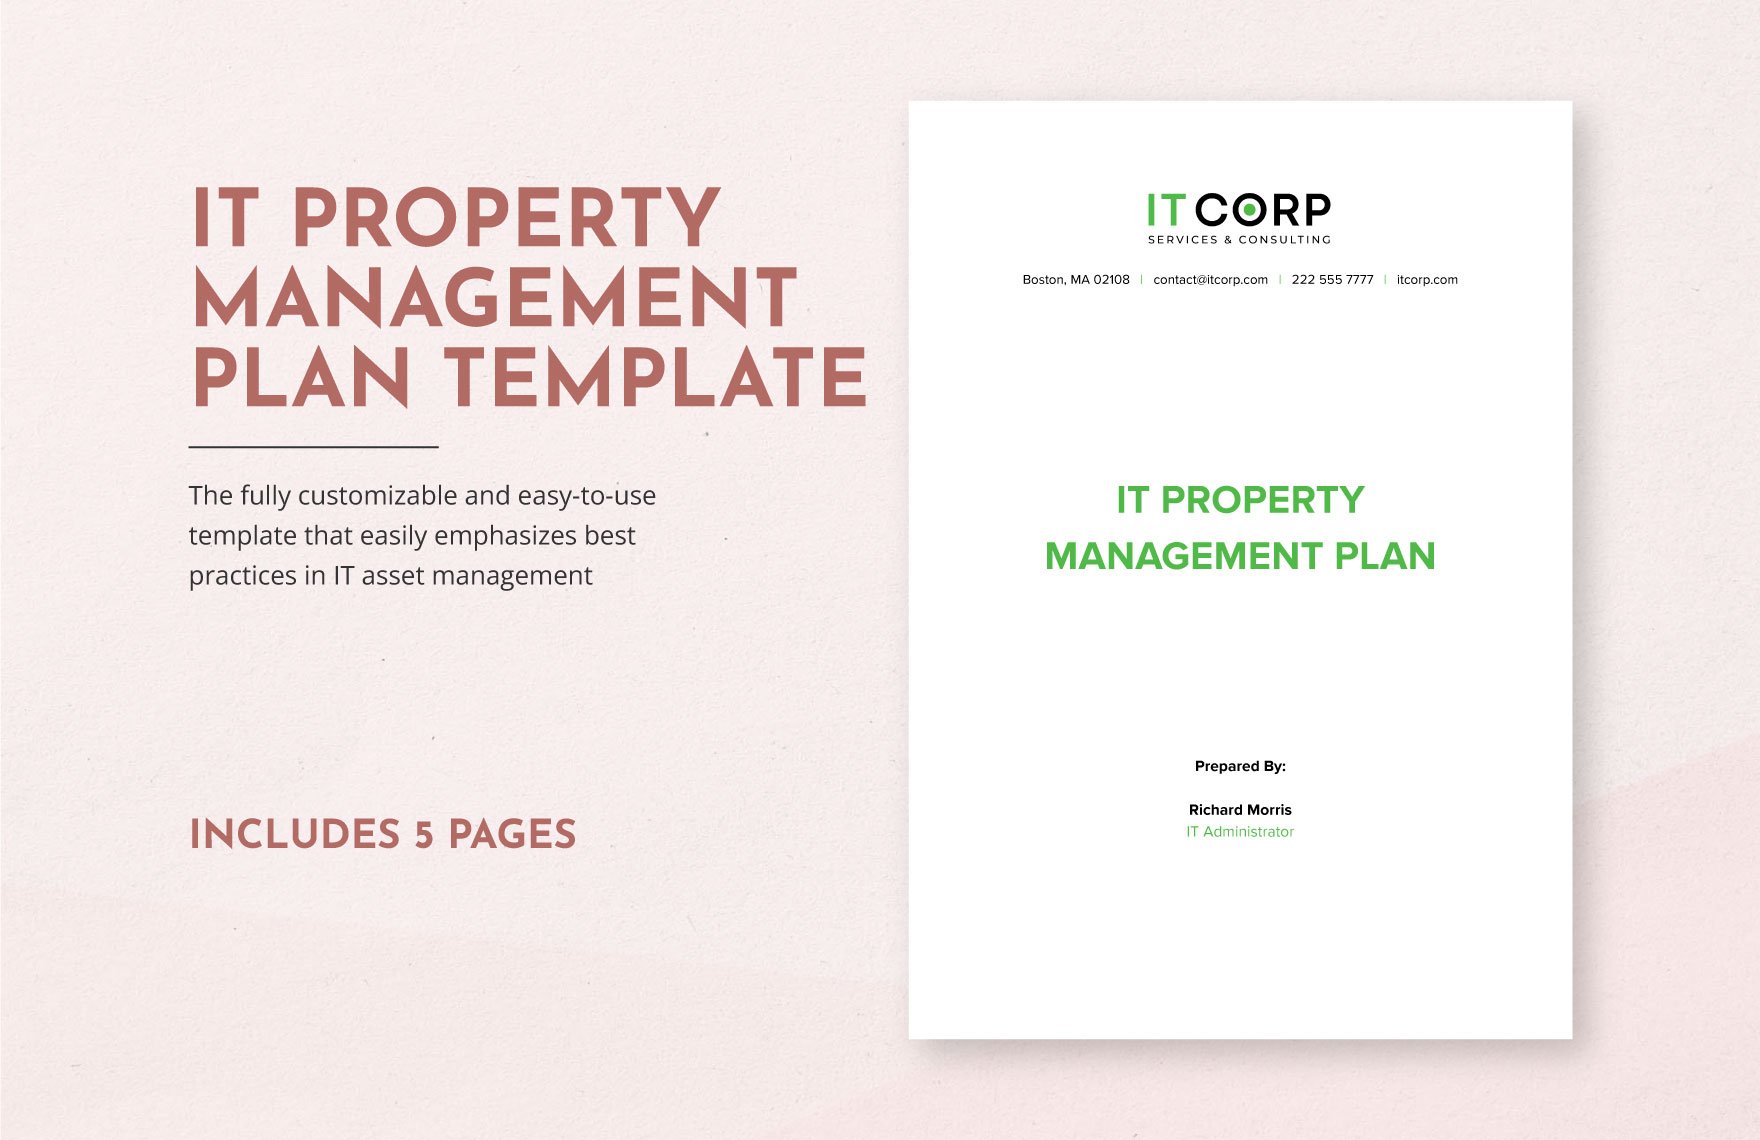 IT Property Management Plan Template in Word, Google Docs, PDF